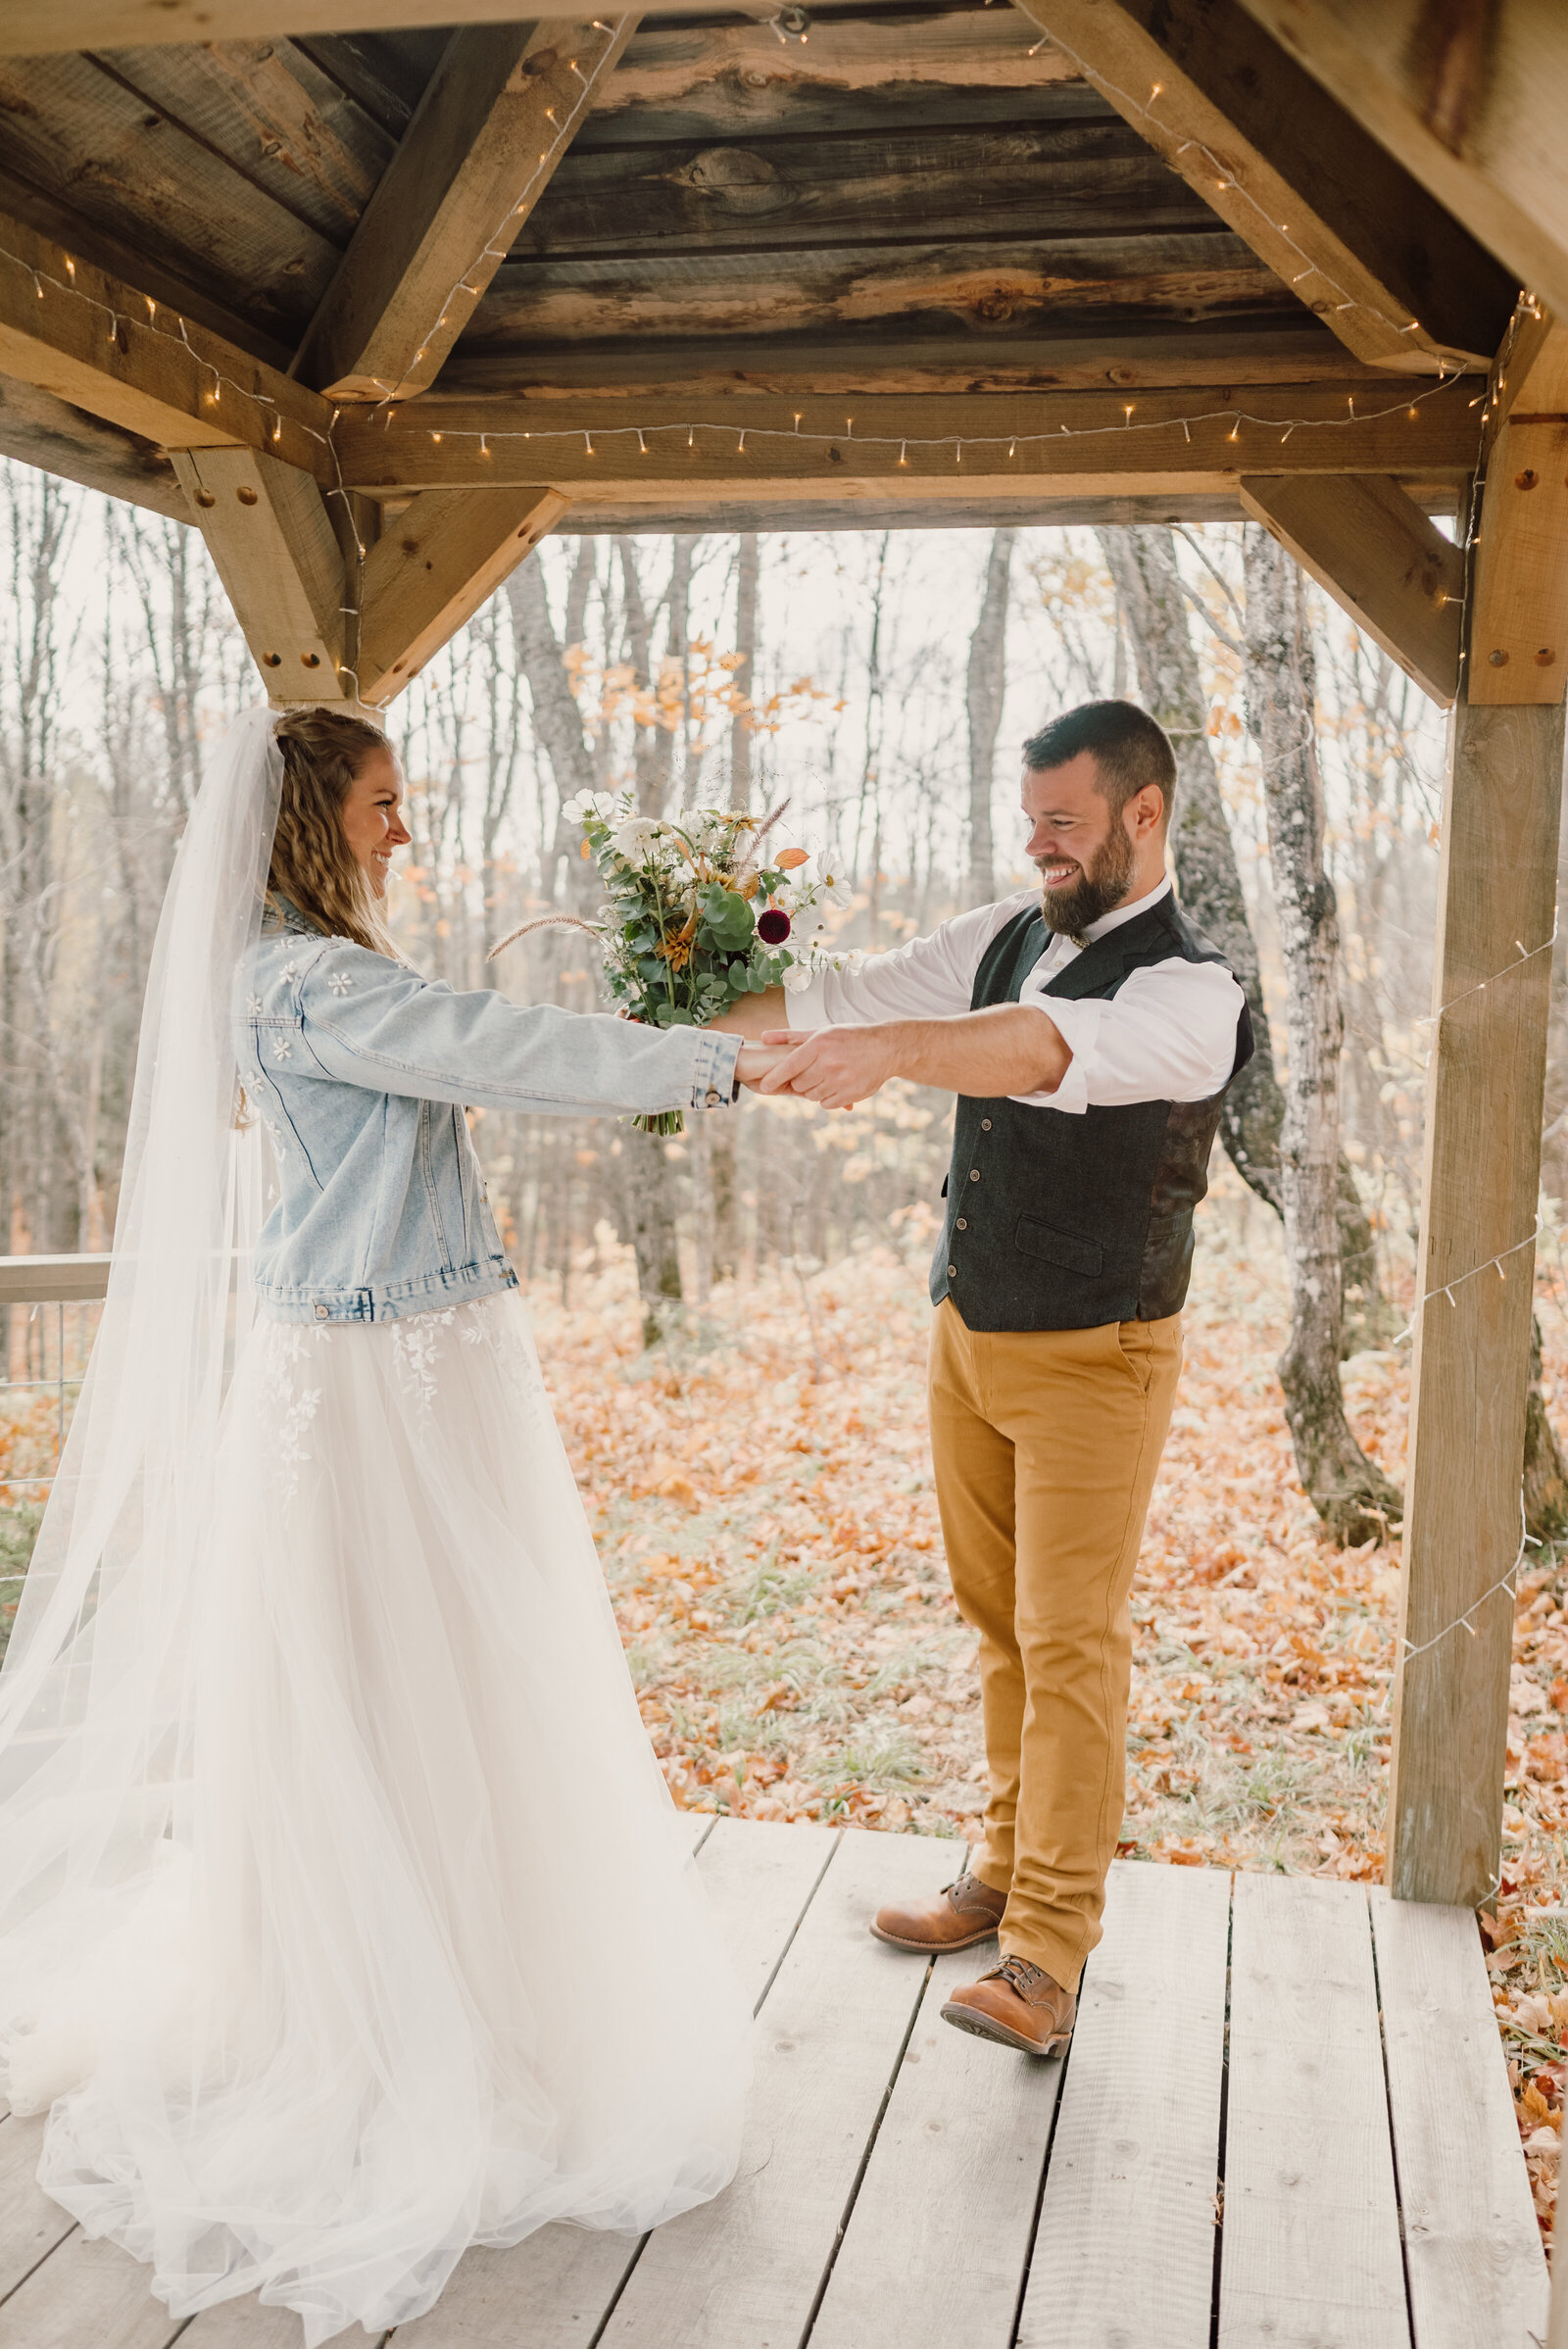 Groom hold bride's hands as he look around her bridal details